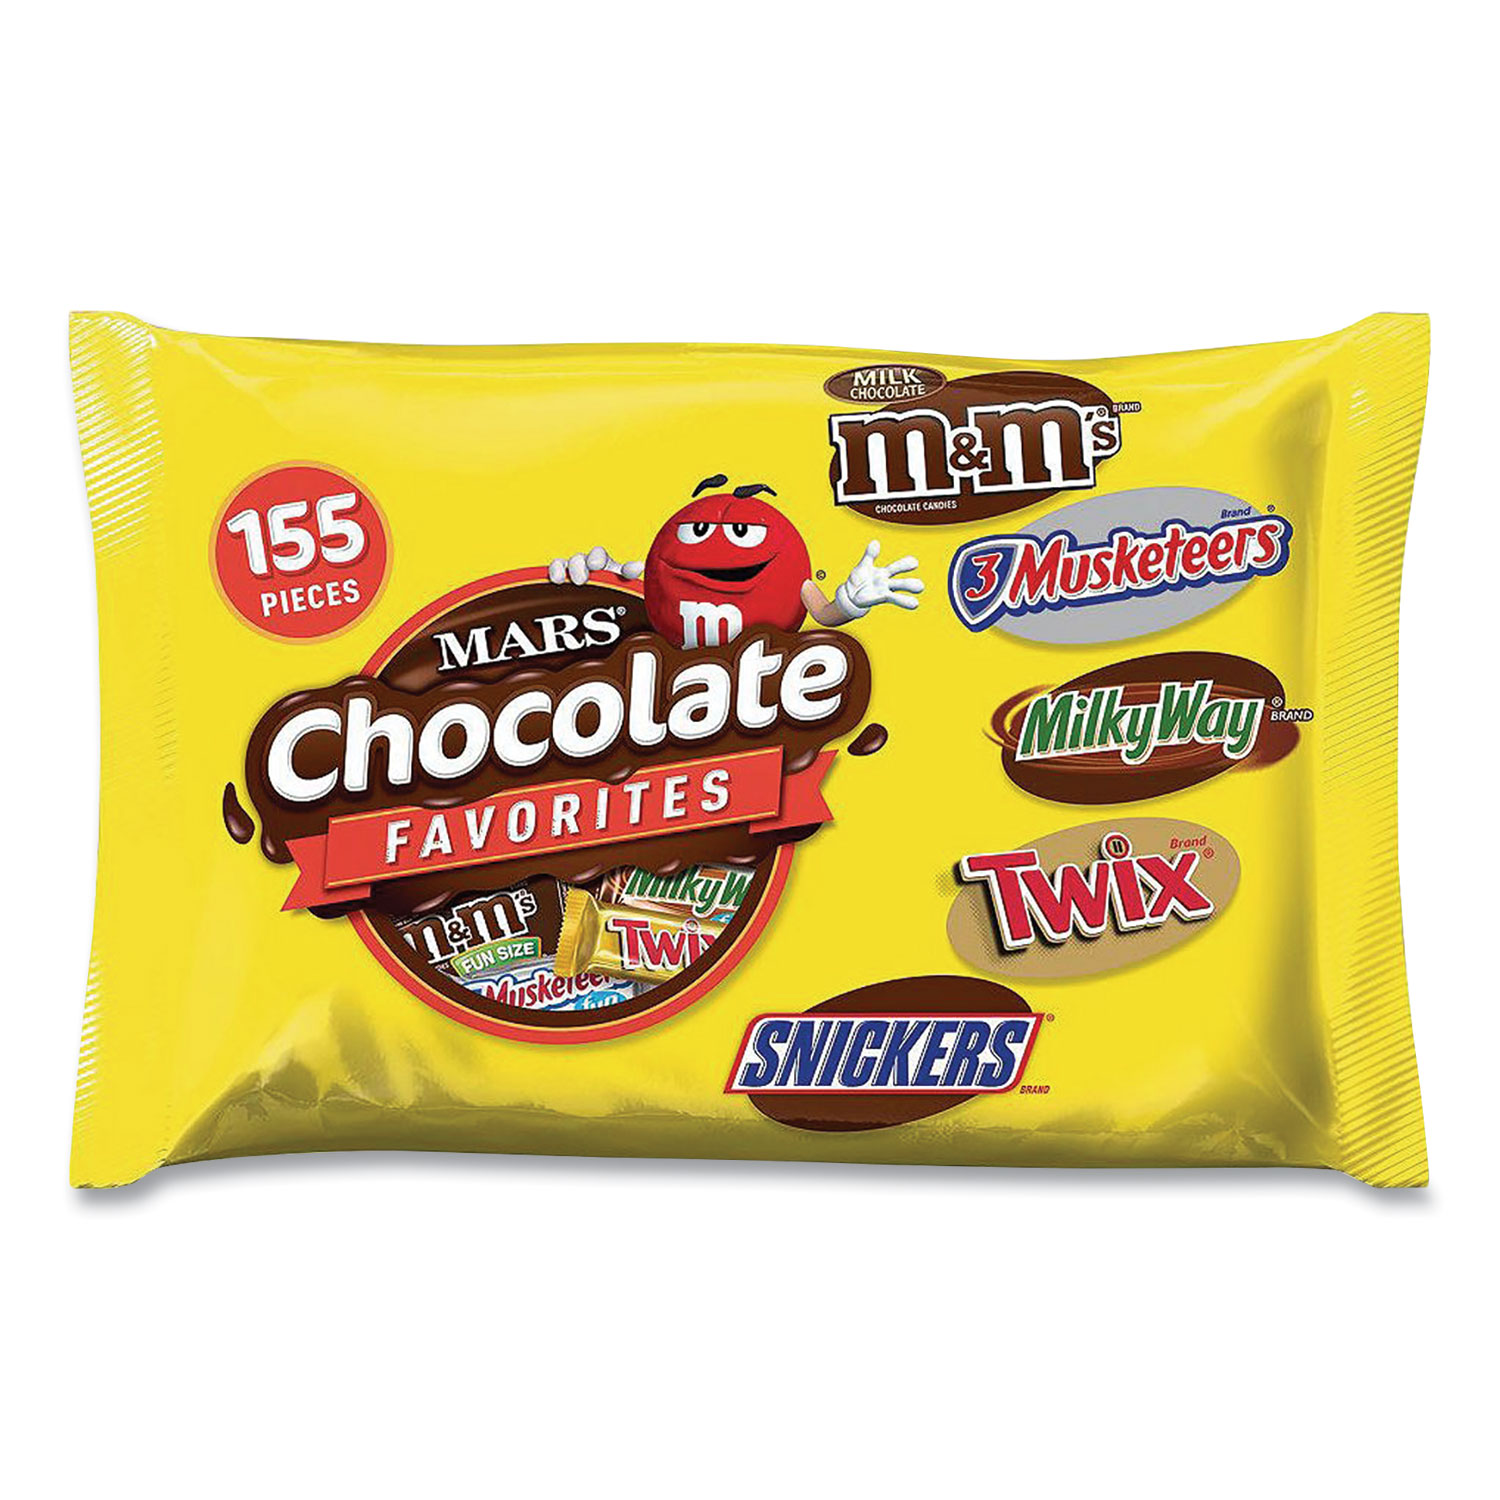  MARS 52810 Chocolate Favorites Fun Size Variety Mix, Assorted, 155 Pieces, 81.7 oz Bag, Free Delivery in 1-4 Business Days (GRR22500066) 